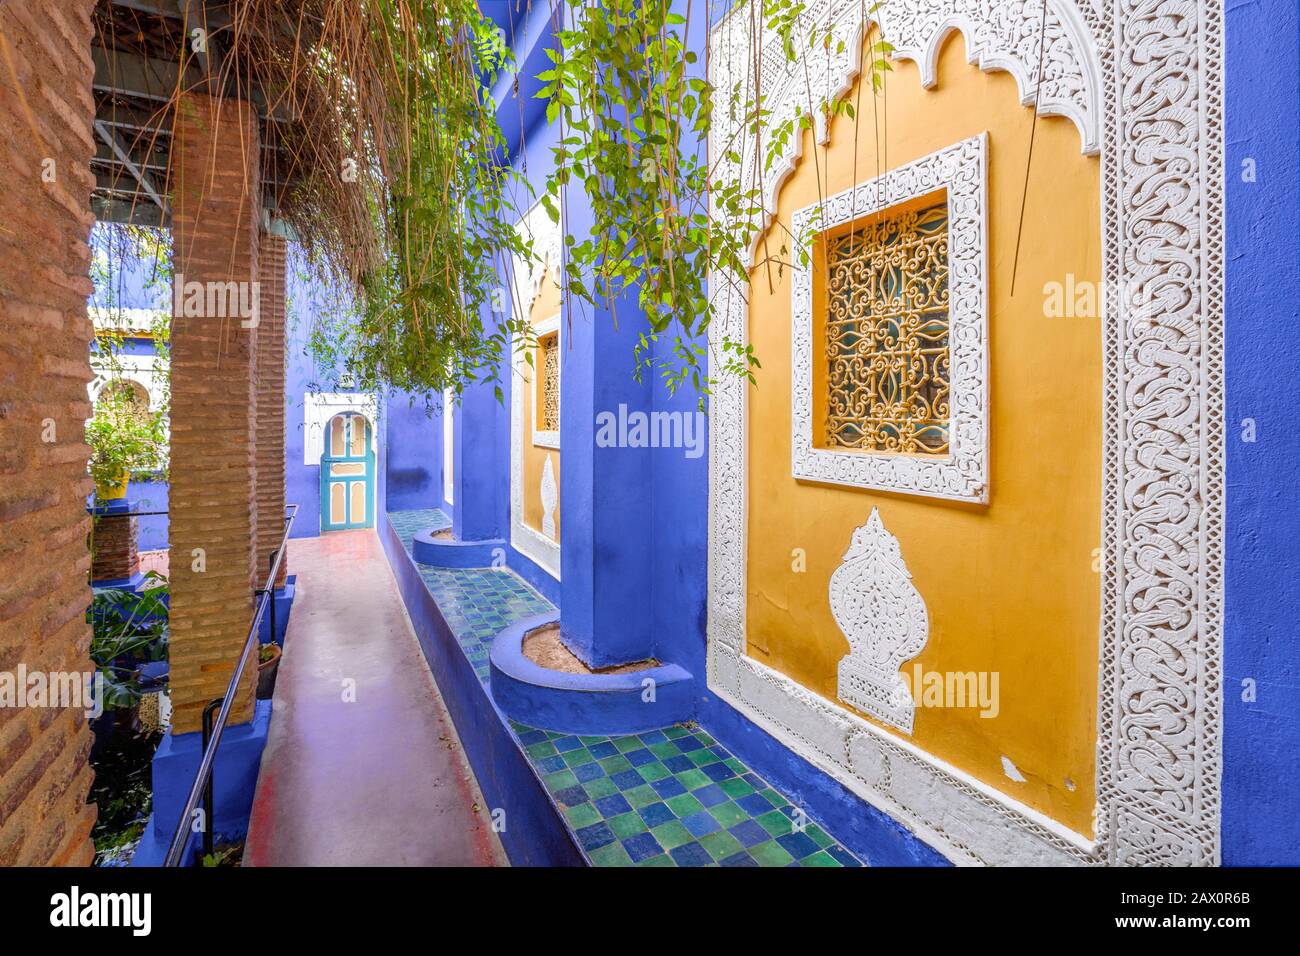 Marrakech, Morocco - January 15, 2020: Colorful architecture in beautiful Majorelle Garden established by Yves Saint Laurent i Stock Photo